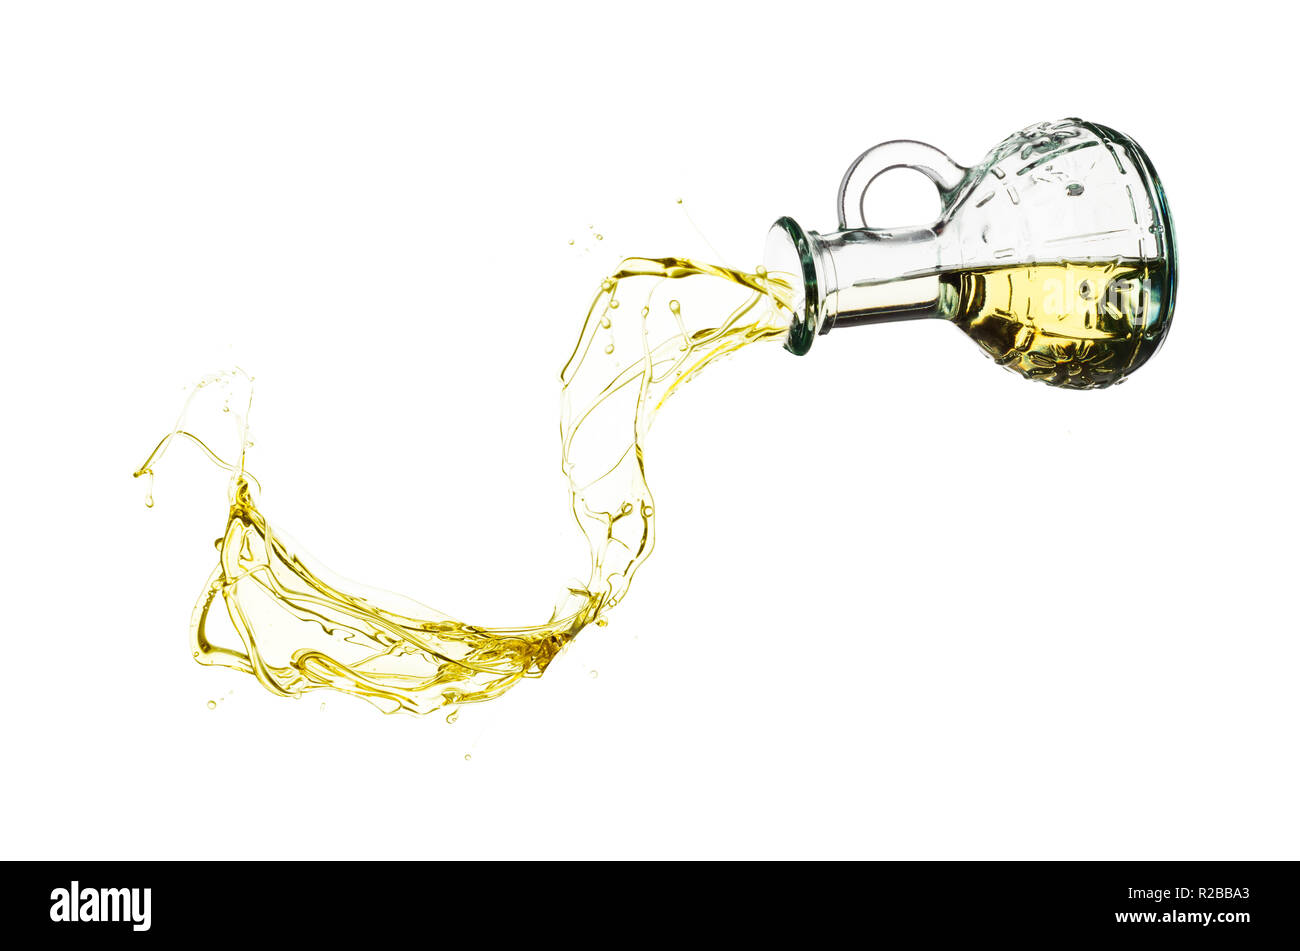 Olive oil pouring from glass bottle isolated against white background Stock Photo